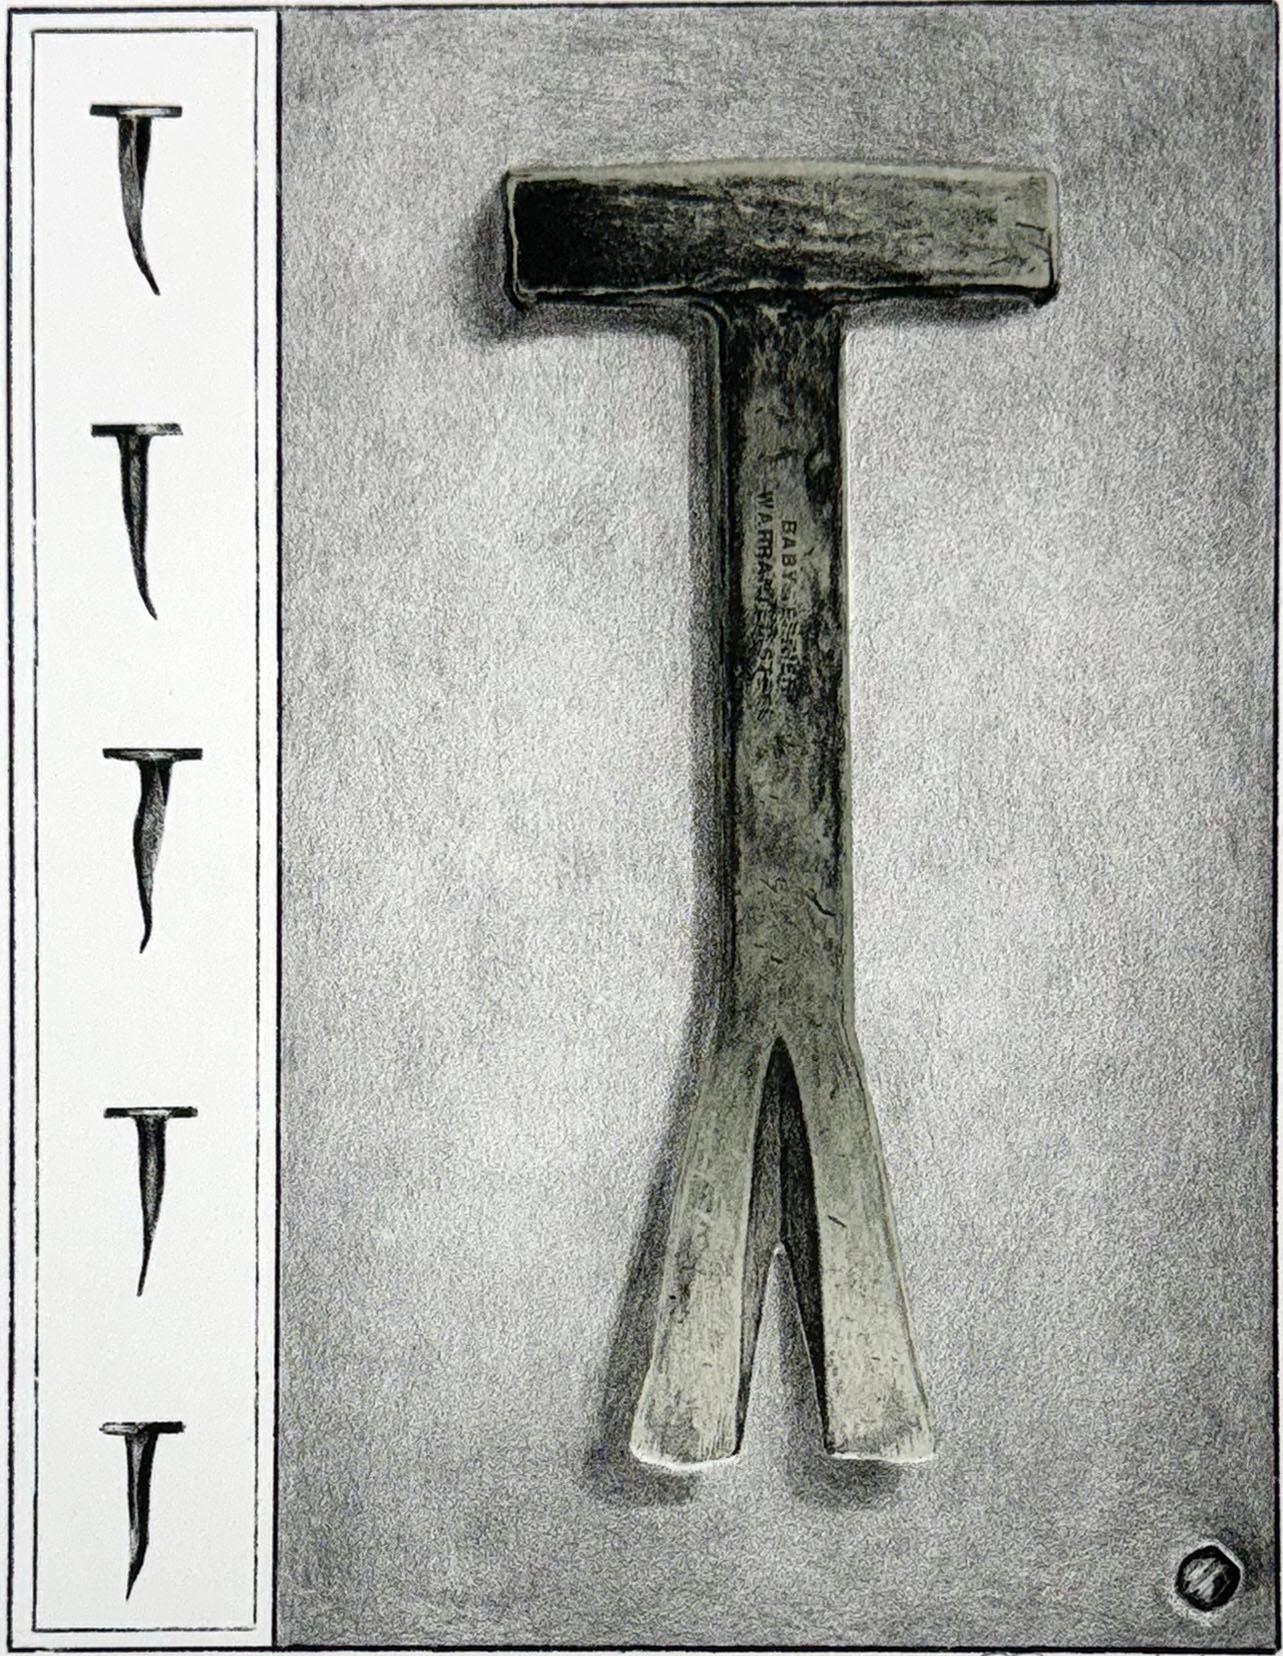 Signed, from an un-numbered set created for a fundraiser (no numbered edition created). Part of a set of prints depicting tools. Others include plumbs, screwdrivers, wood shavers and clamps.

Carolyn Muskat (printmaking/papermaking) is the owner and